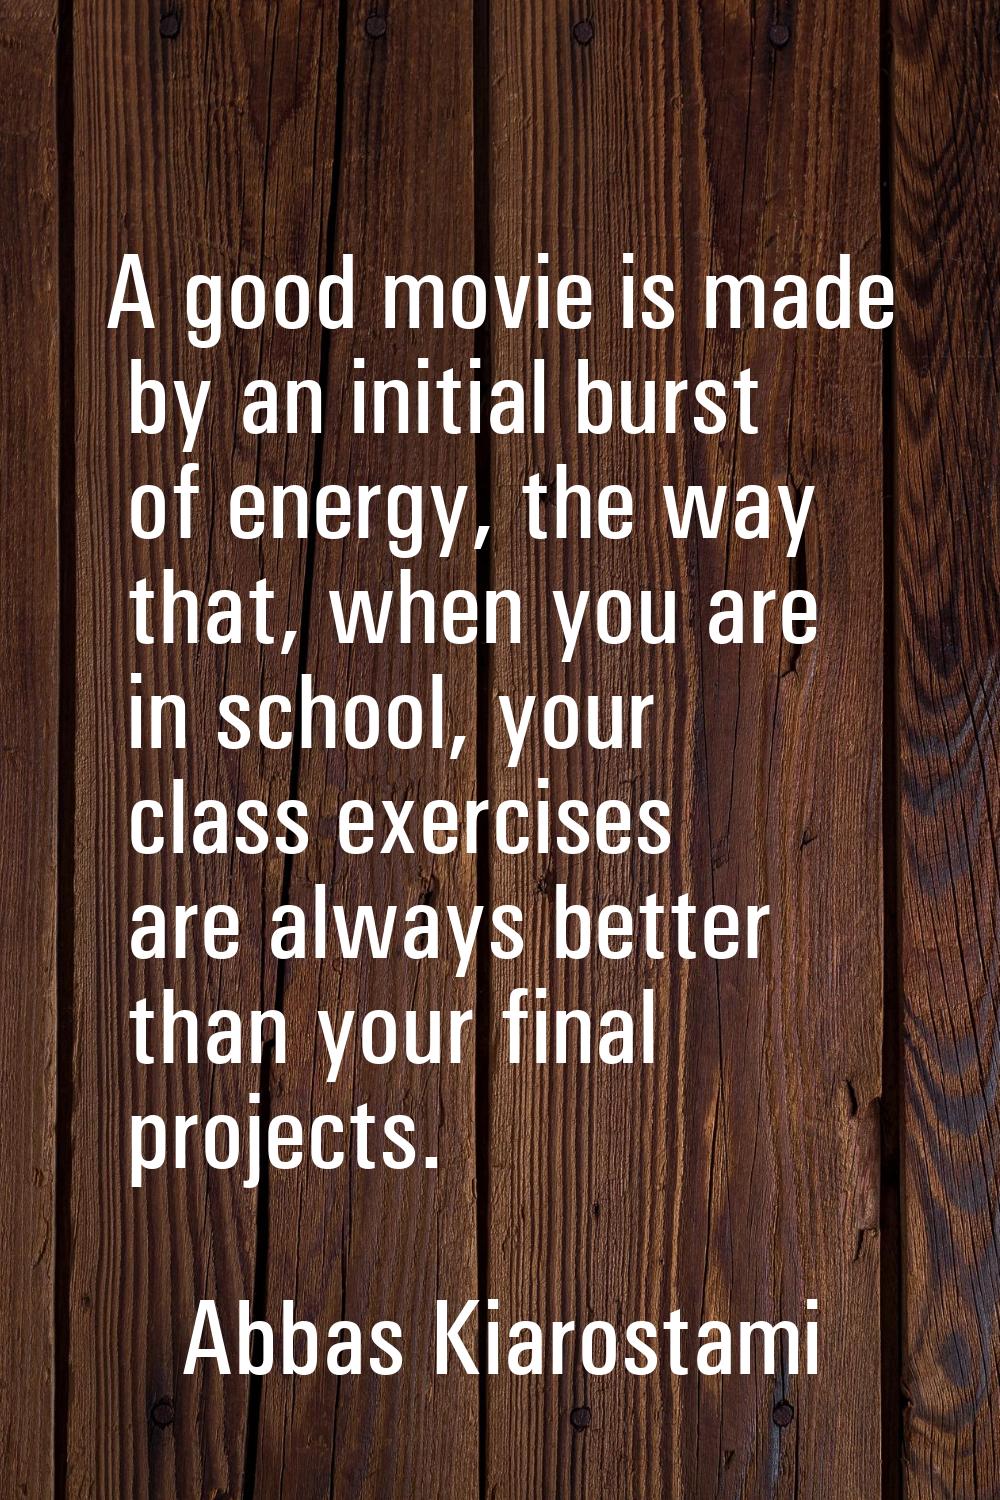 A good movie is made by an initial burst of energy, the way that, when you are in school, your clas